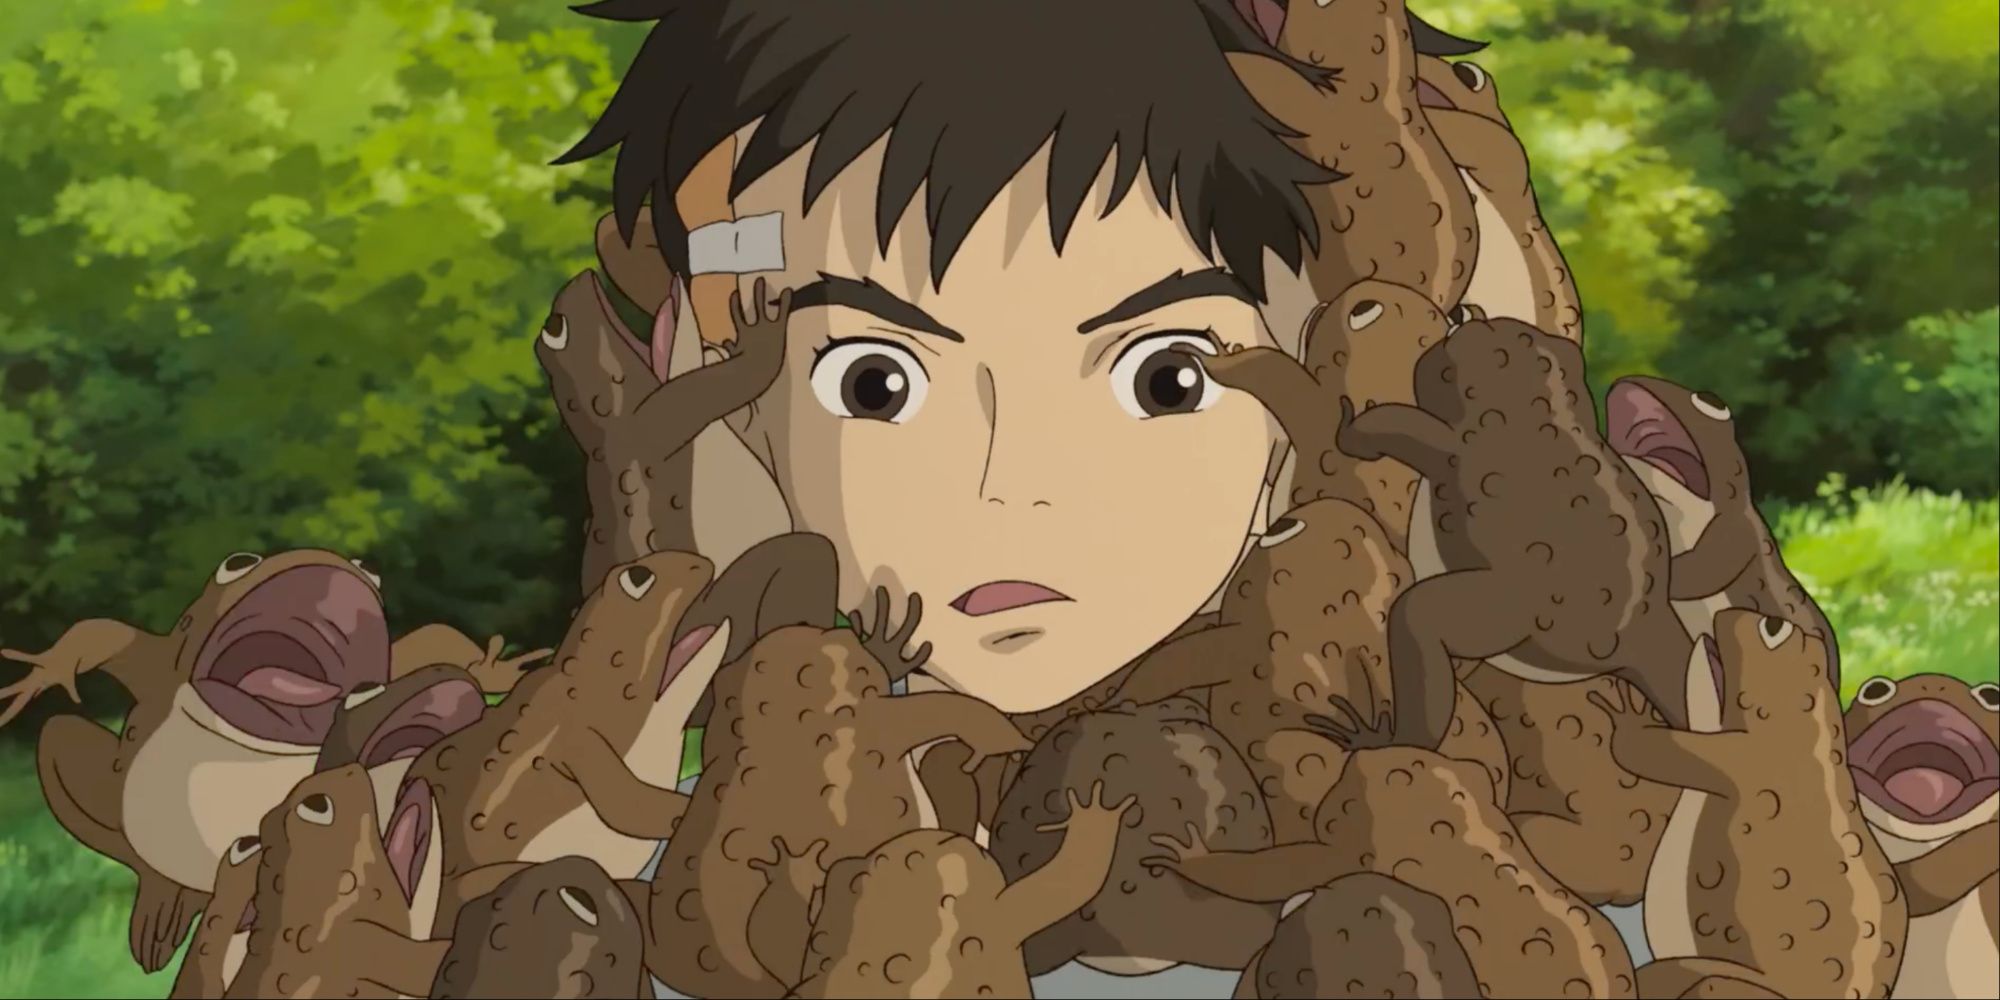 Mahito covered in toads in The Boy and the Heron